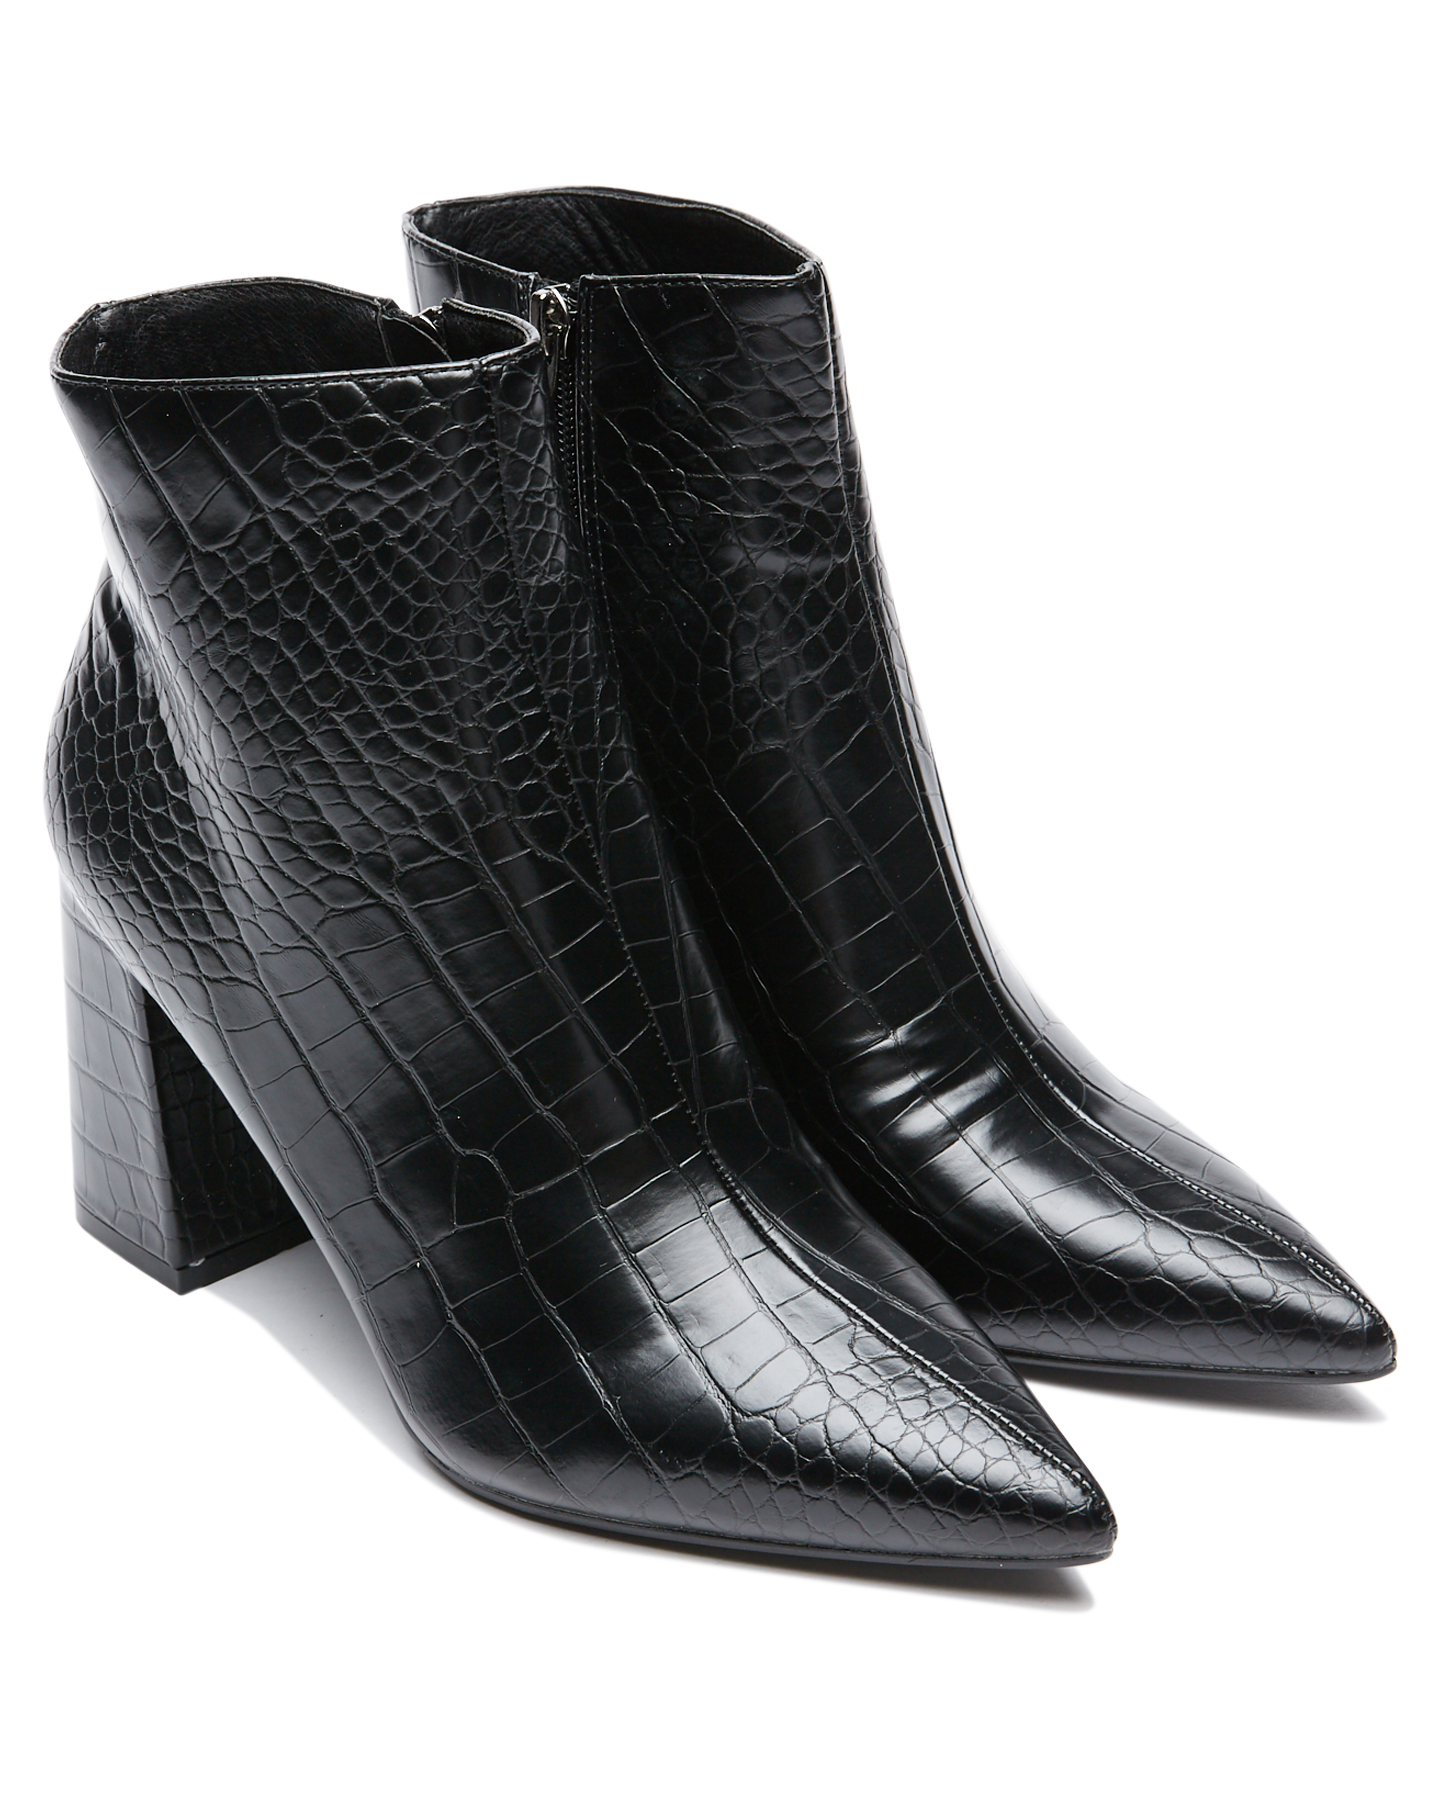 Therapy Womens Alloy Boot - Black Croc | SurfStitch